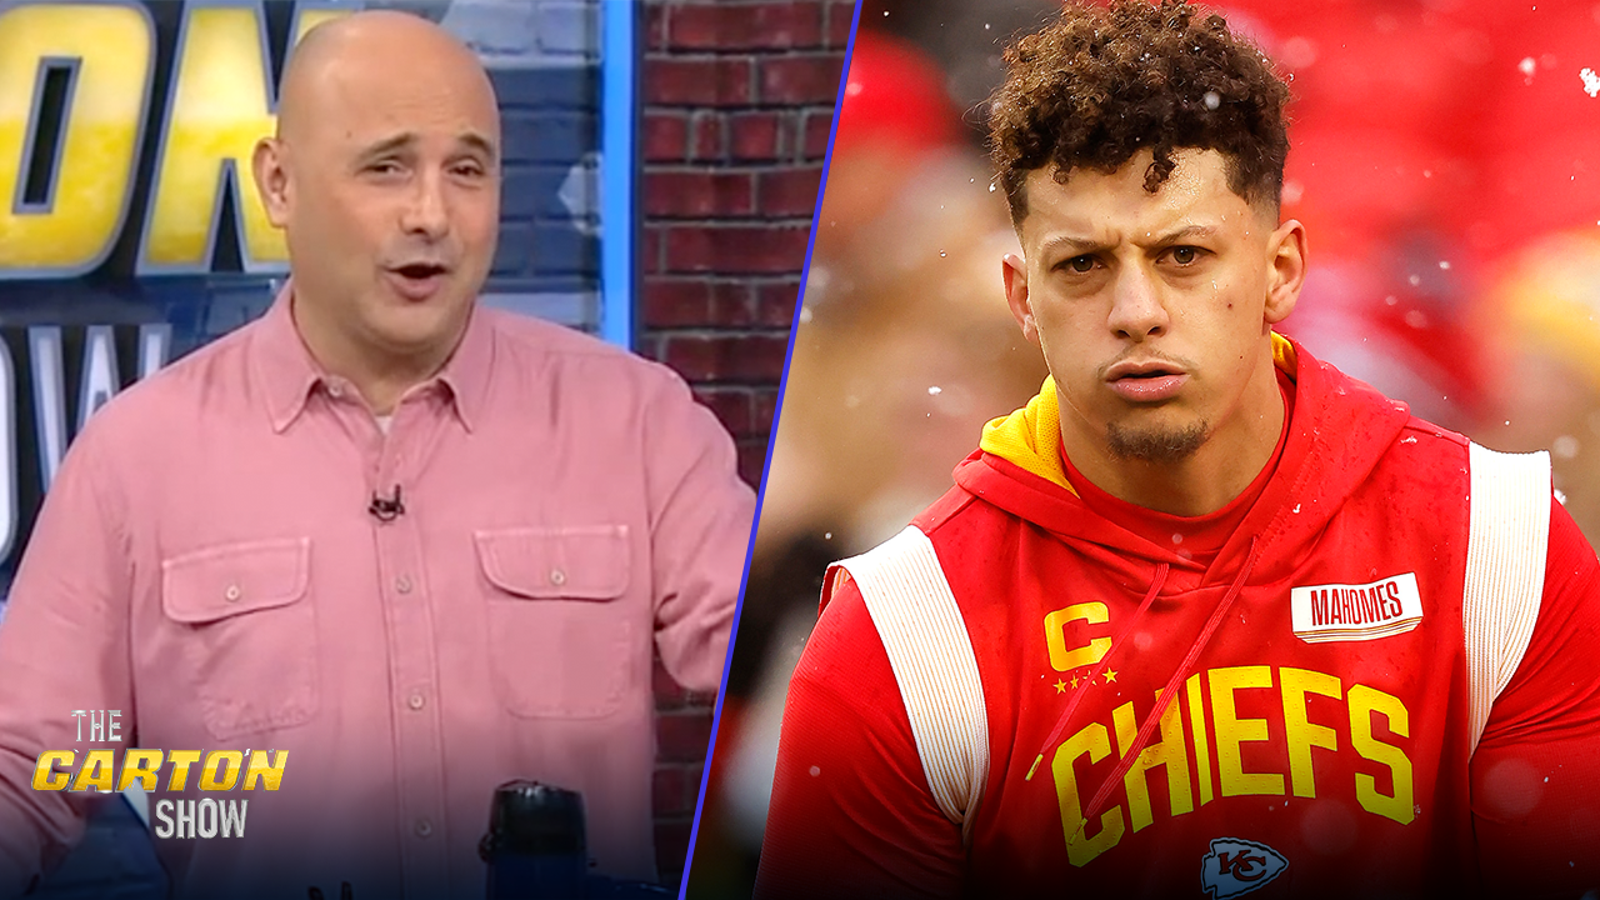 Patrick Mahomes looks to bring Chiefs a win on injured ankle